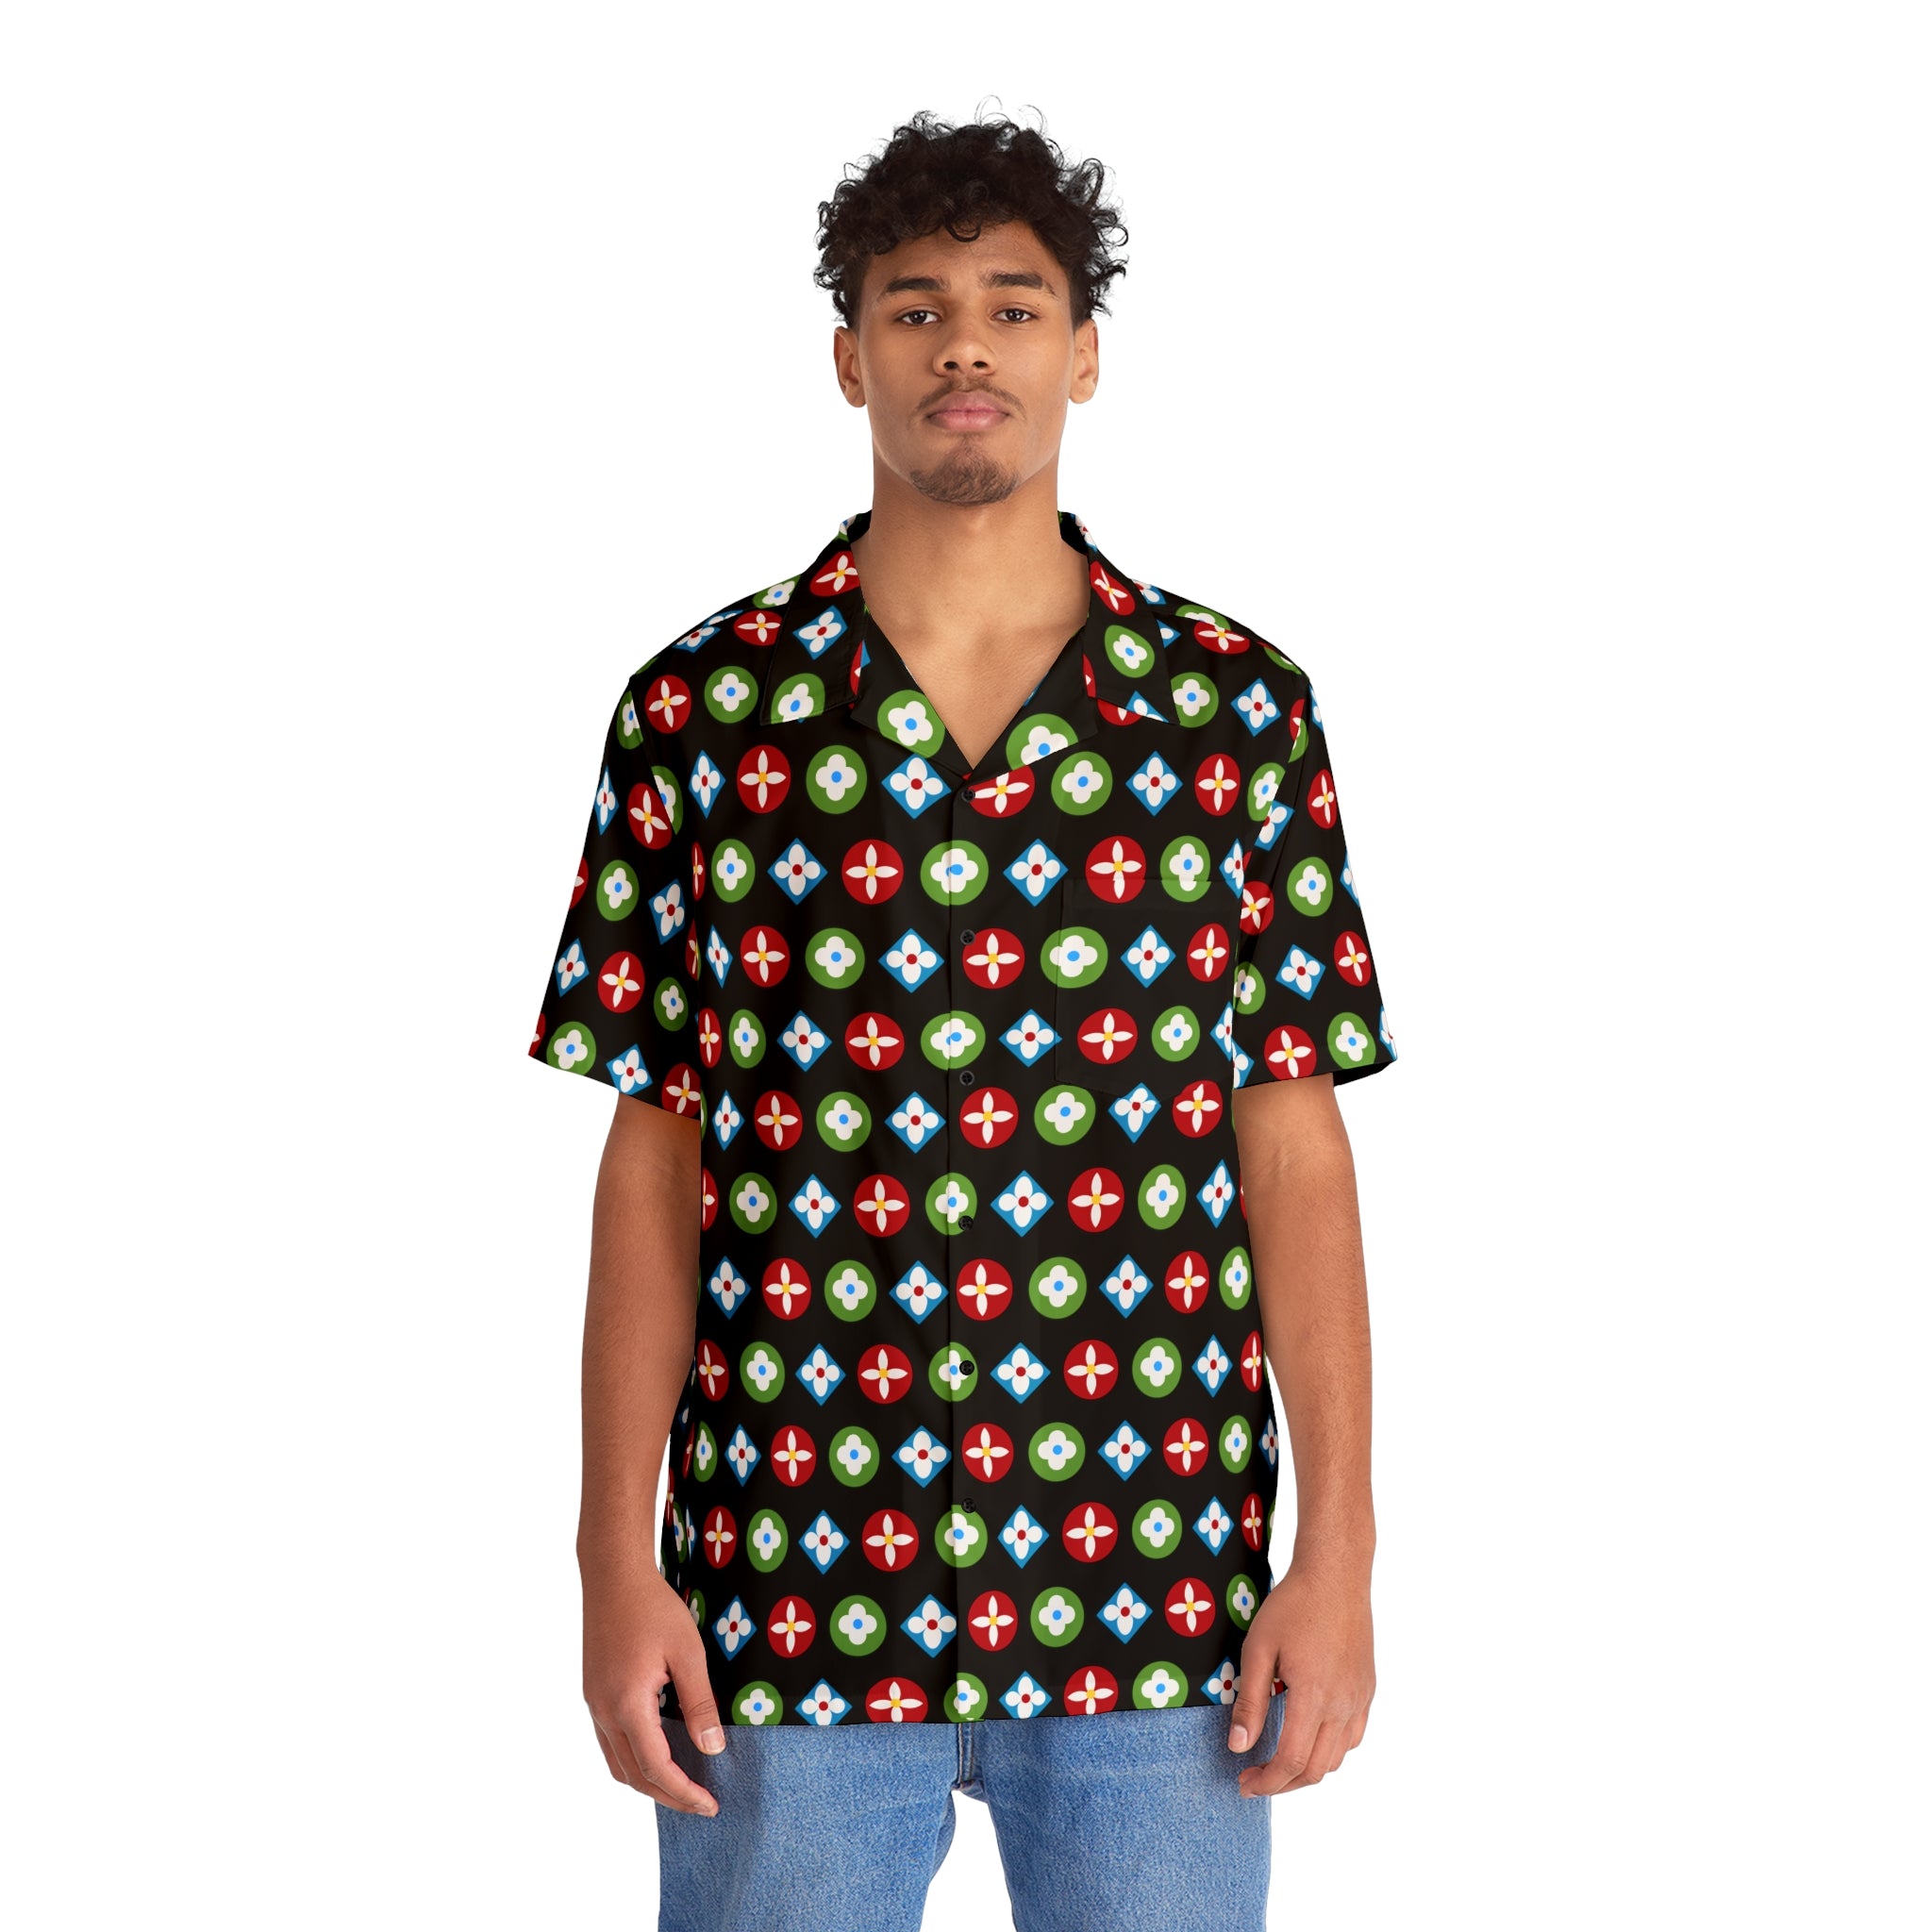  Groove Collection Trilogy of Icons Pattern (Red, Green, Blue) Black Unisex Gender Neutral Button Up Shirt, Hawaiian Shirt Men's Shirts